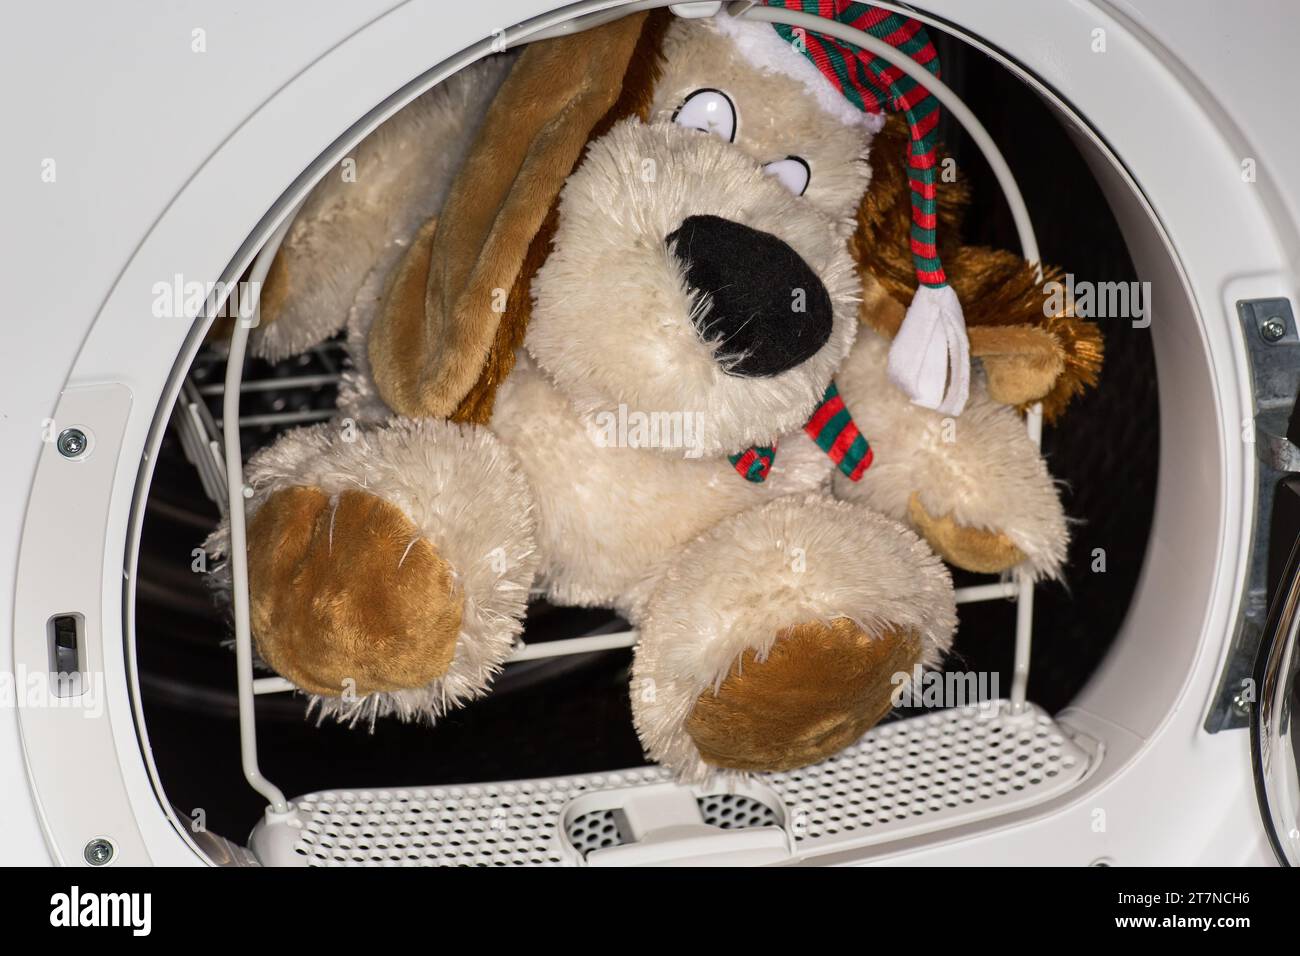 children's soft toy in the dryer basket after washing, home life. Stock Photo